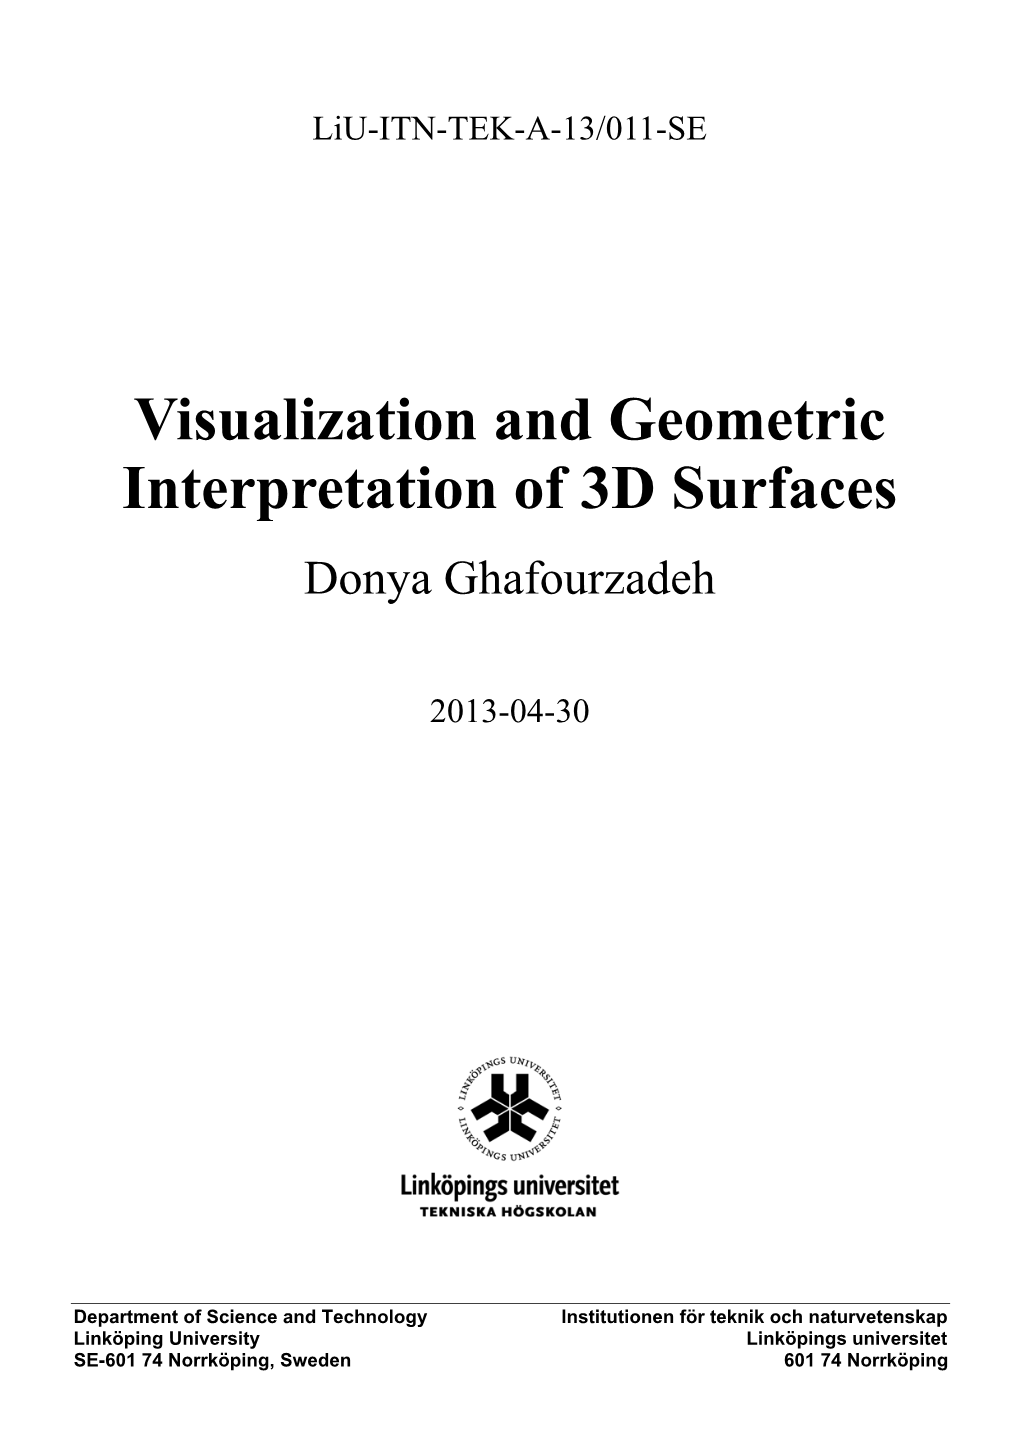 Visualization and Geometric Interpretation of 3D Surfaces Donya Ghafourzadeh